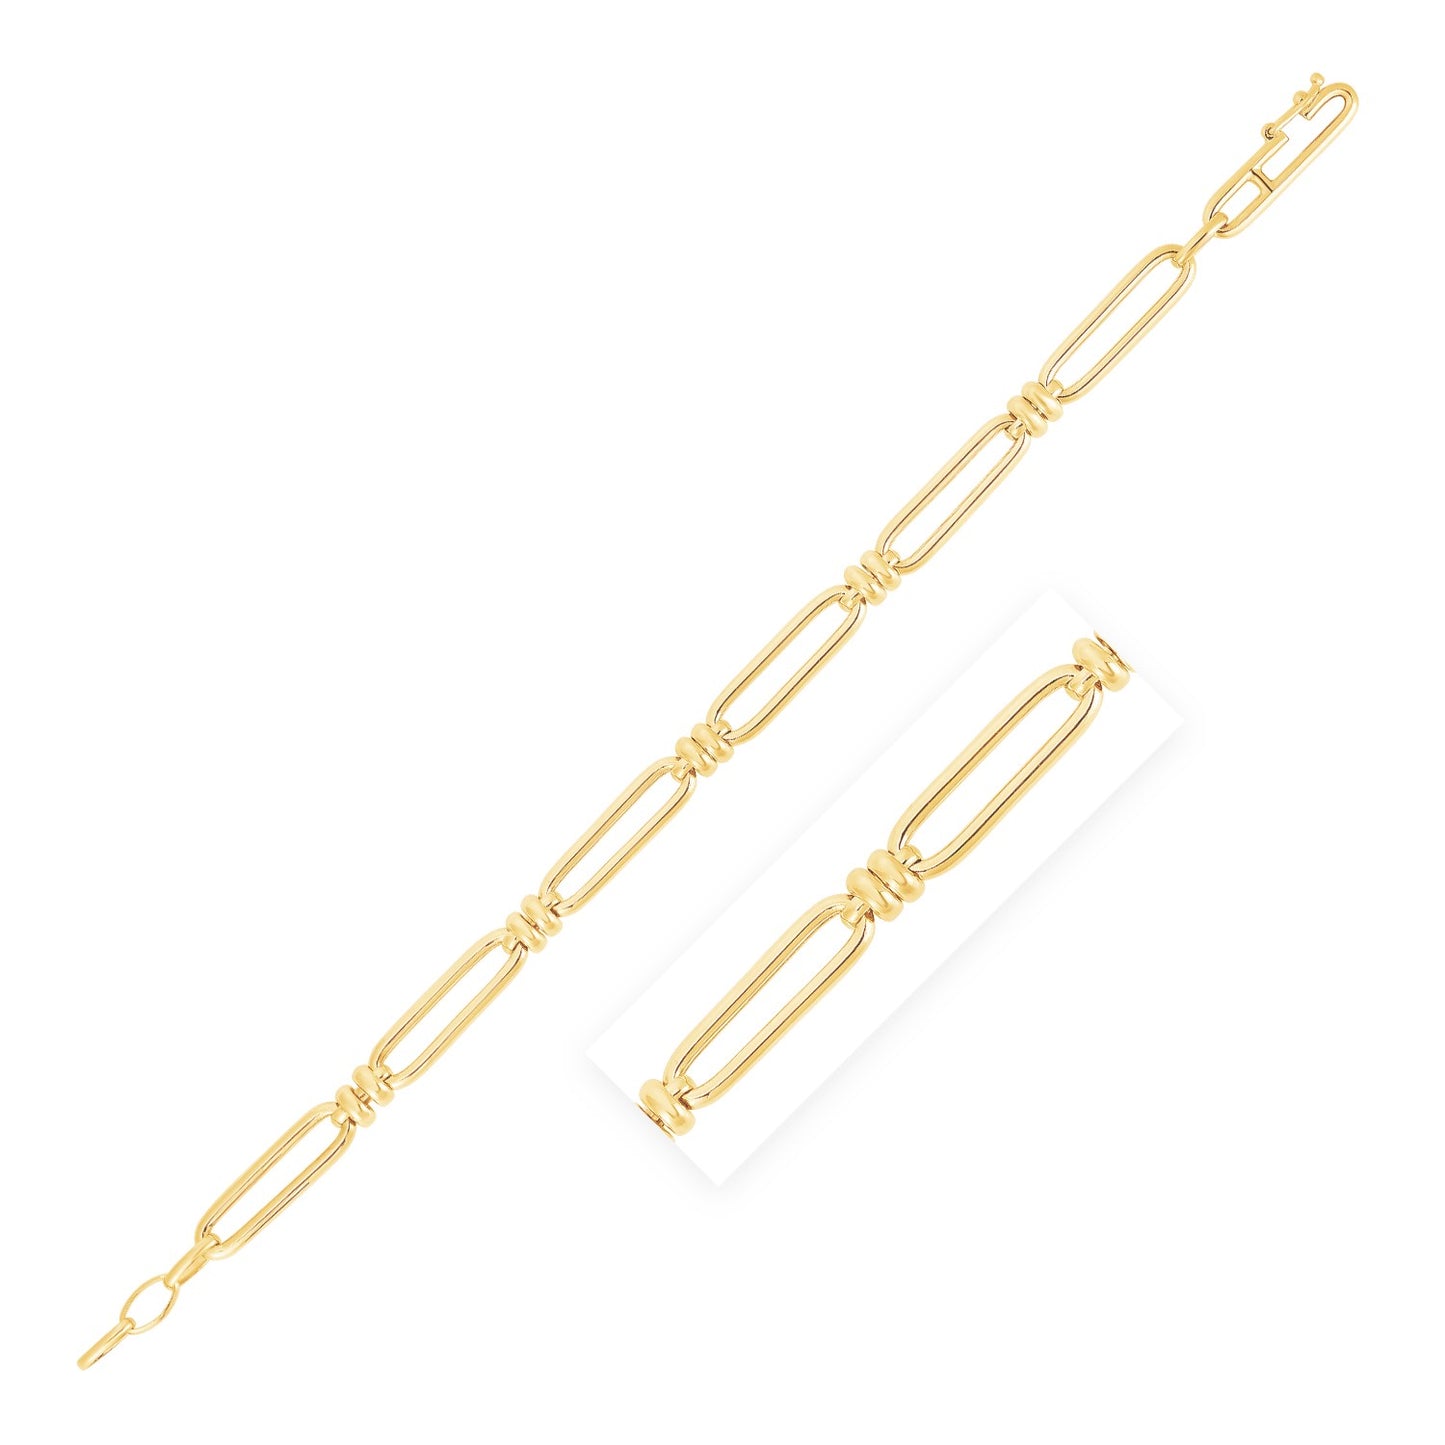 14k Yellow Gold High Polish Paperclip Double Bar Link Chain Bracelet